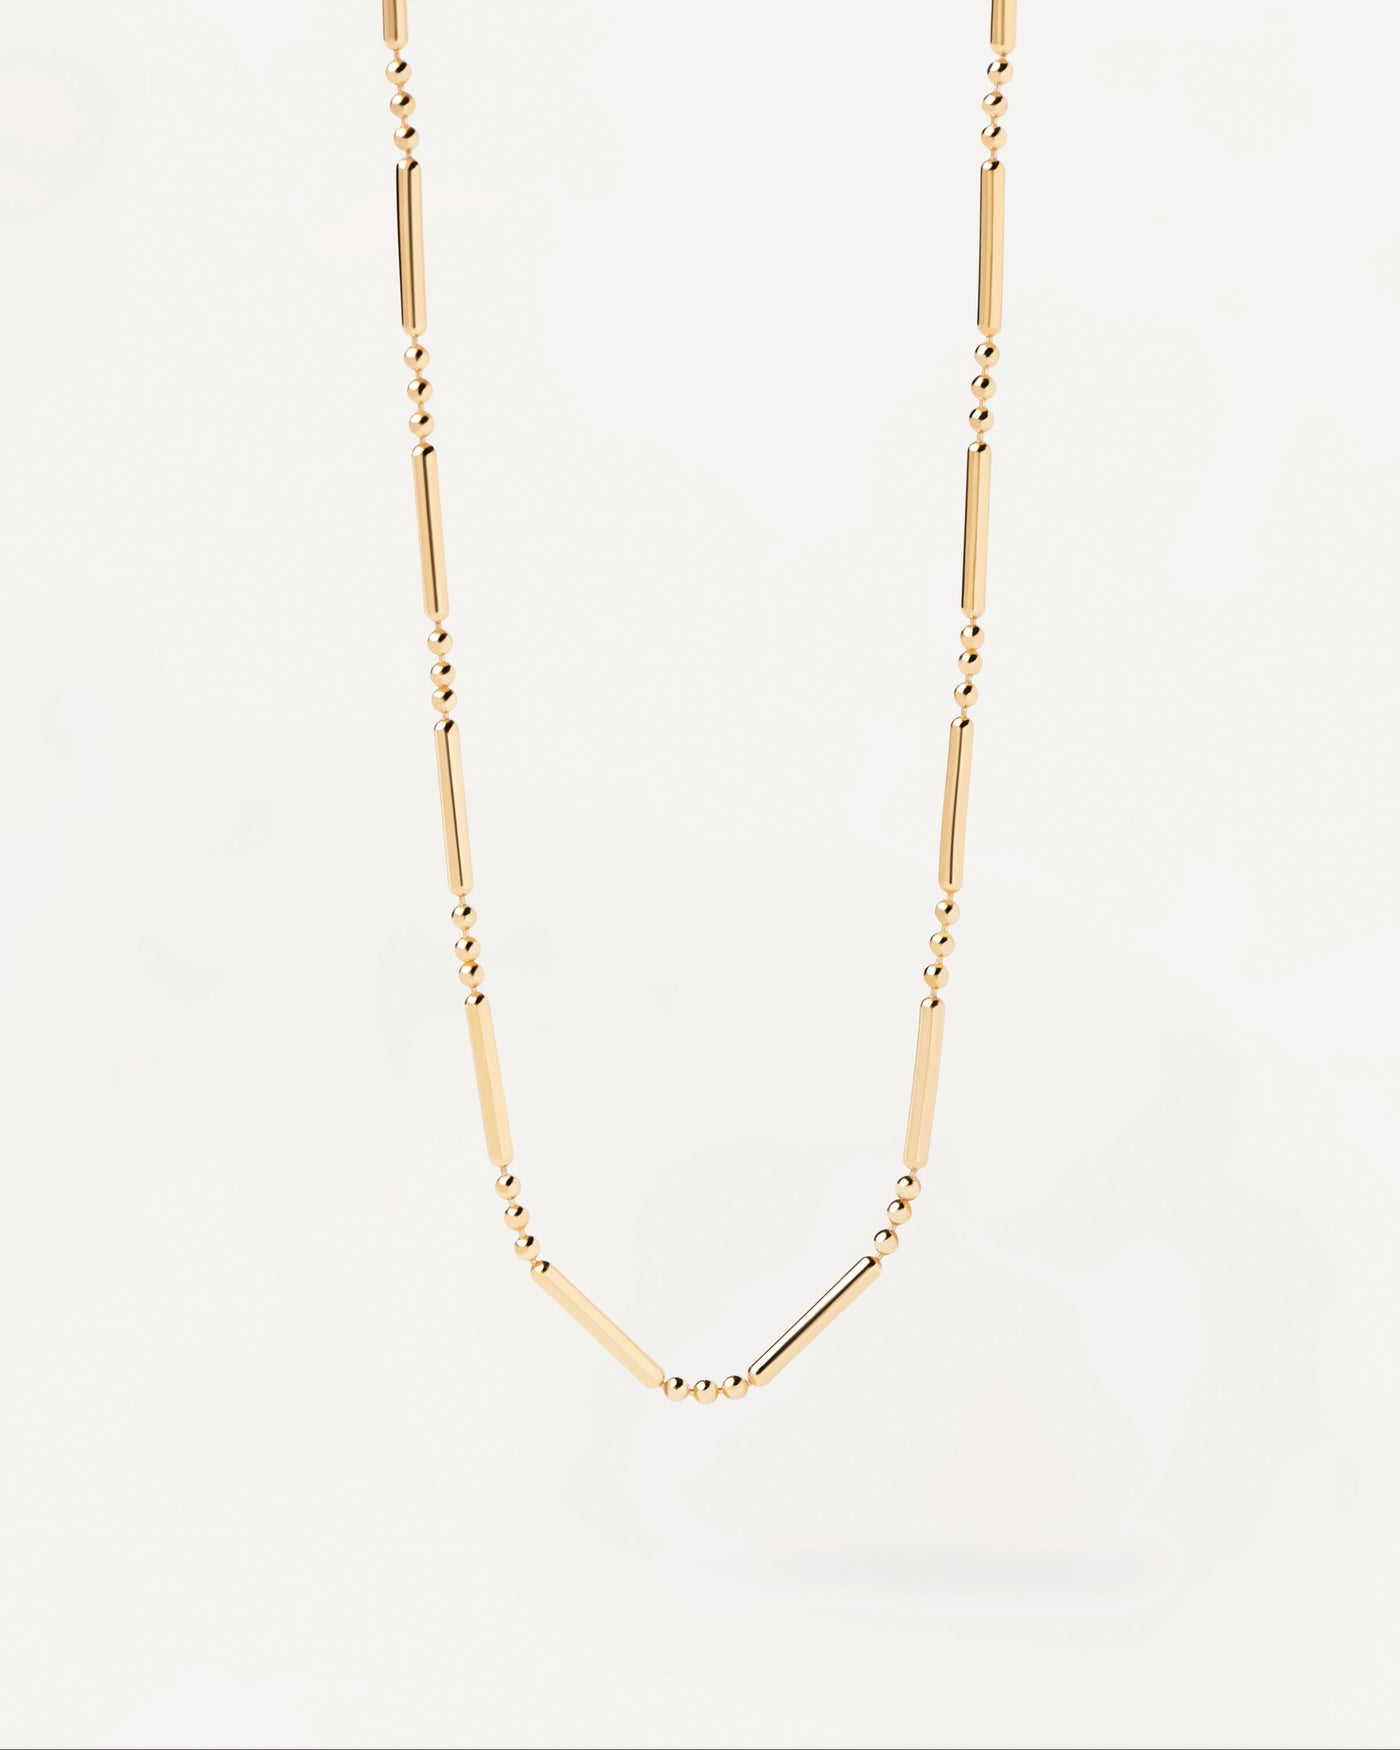 2023 Selection | Valeria Necklace. Ball and bar textured necklace in gold-plated silver. Get the latest arrival from PDPAOLA. Place your order safely and get this Best Seller. Free Shipping.